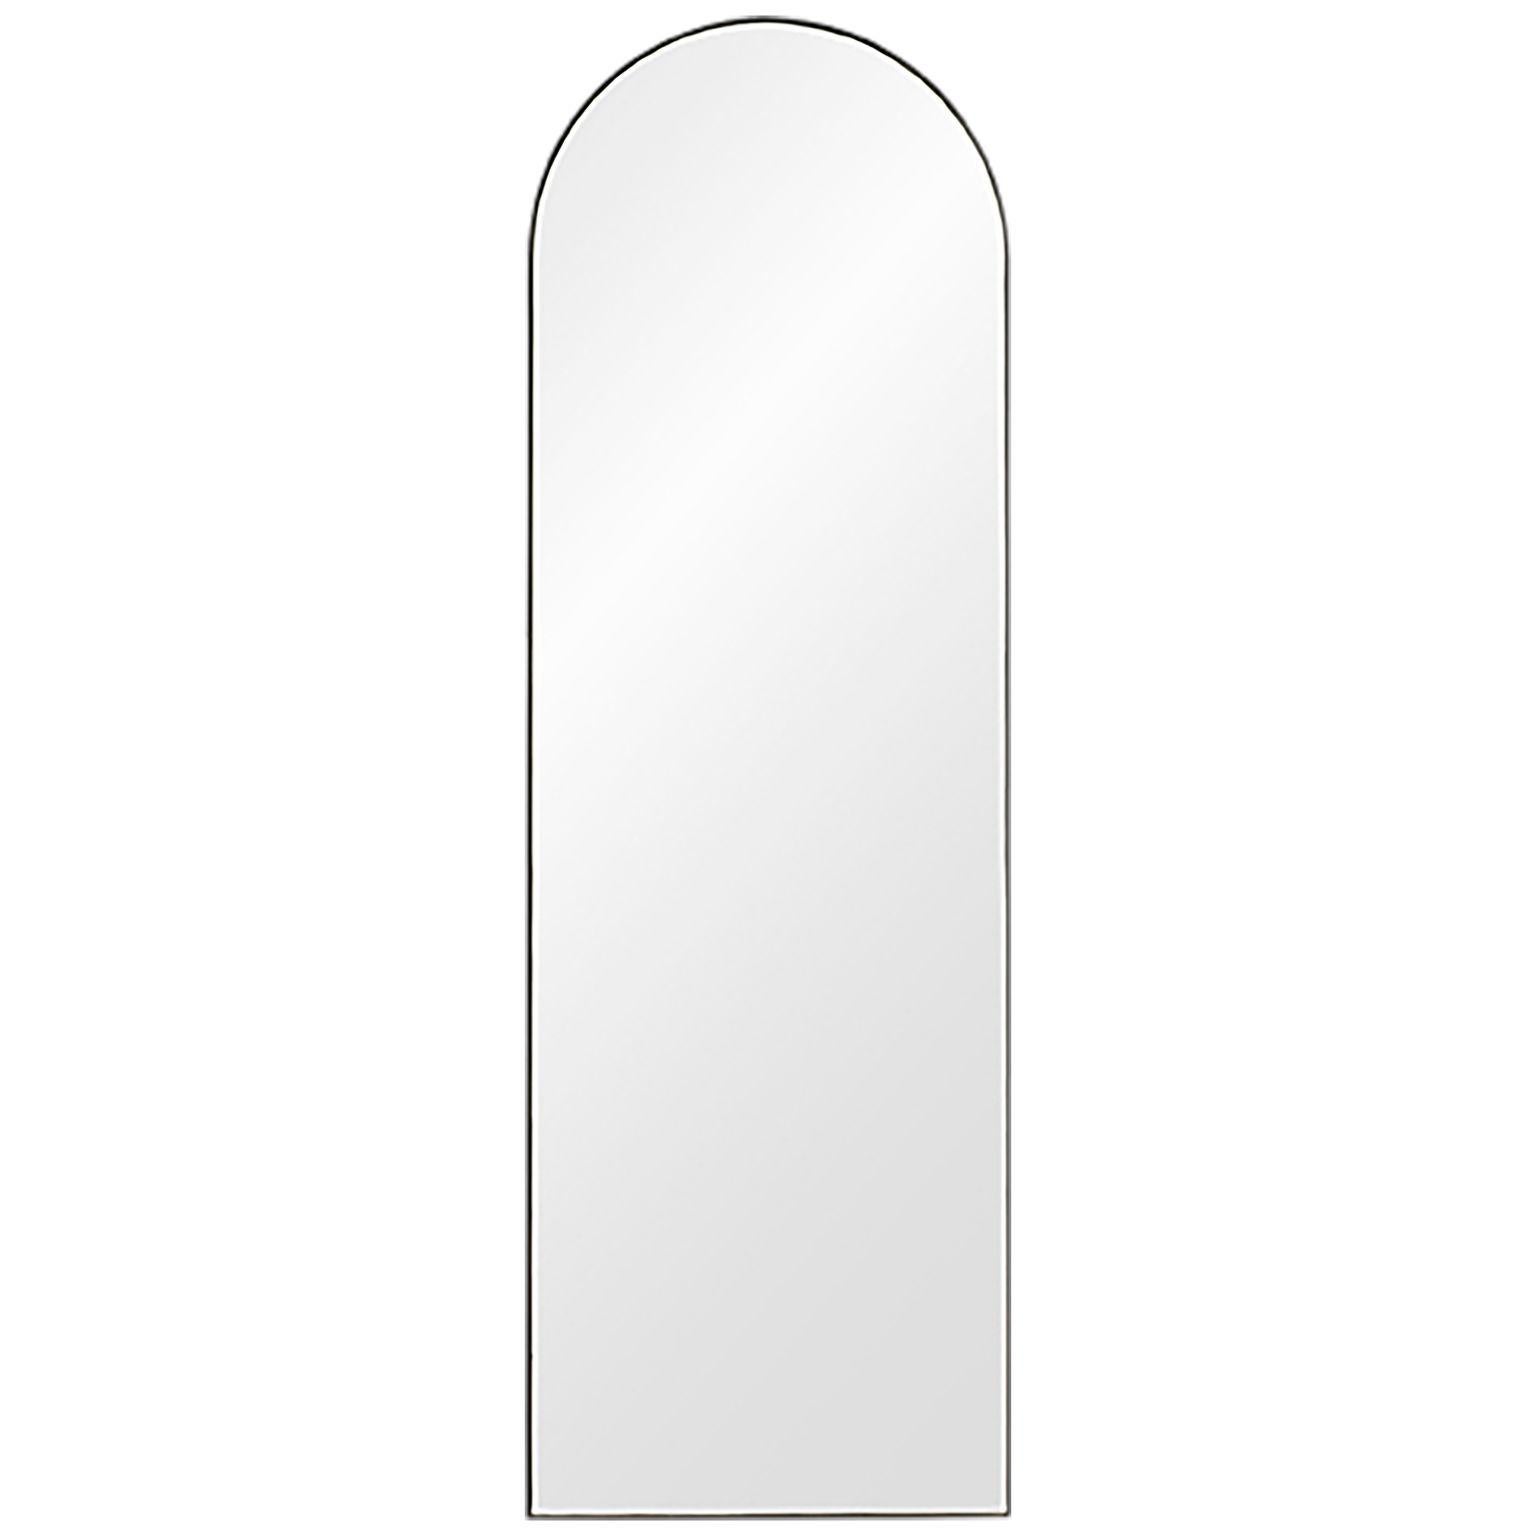 Arcade Minimalist mirror 
Dimensions: L 45 x W 2.5 x H 140 CM
Materials: Mirror, MDF

These mirrors draws associations to arcades –an old architectural element that date back thousands of years. Arcades has been used in ancient Roman